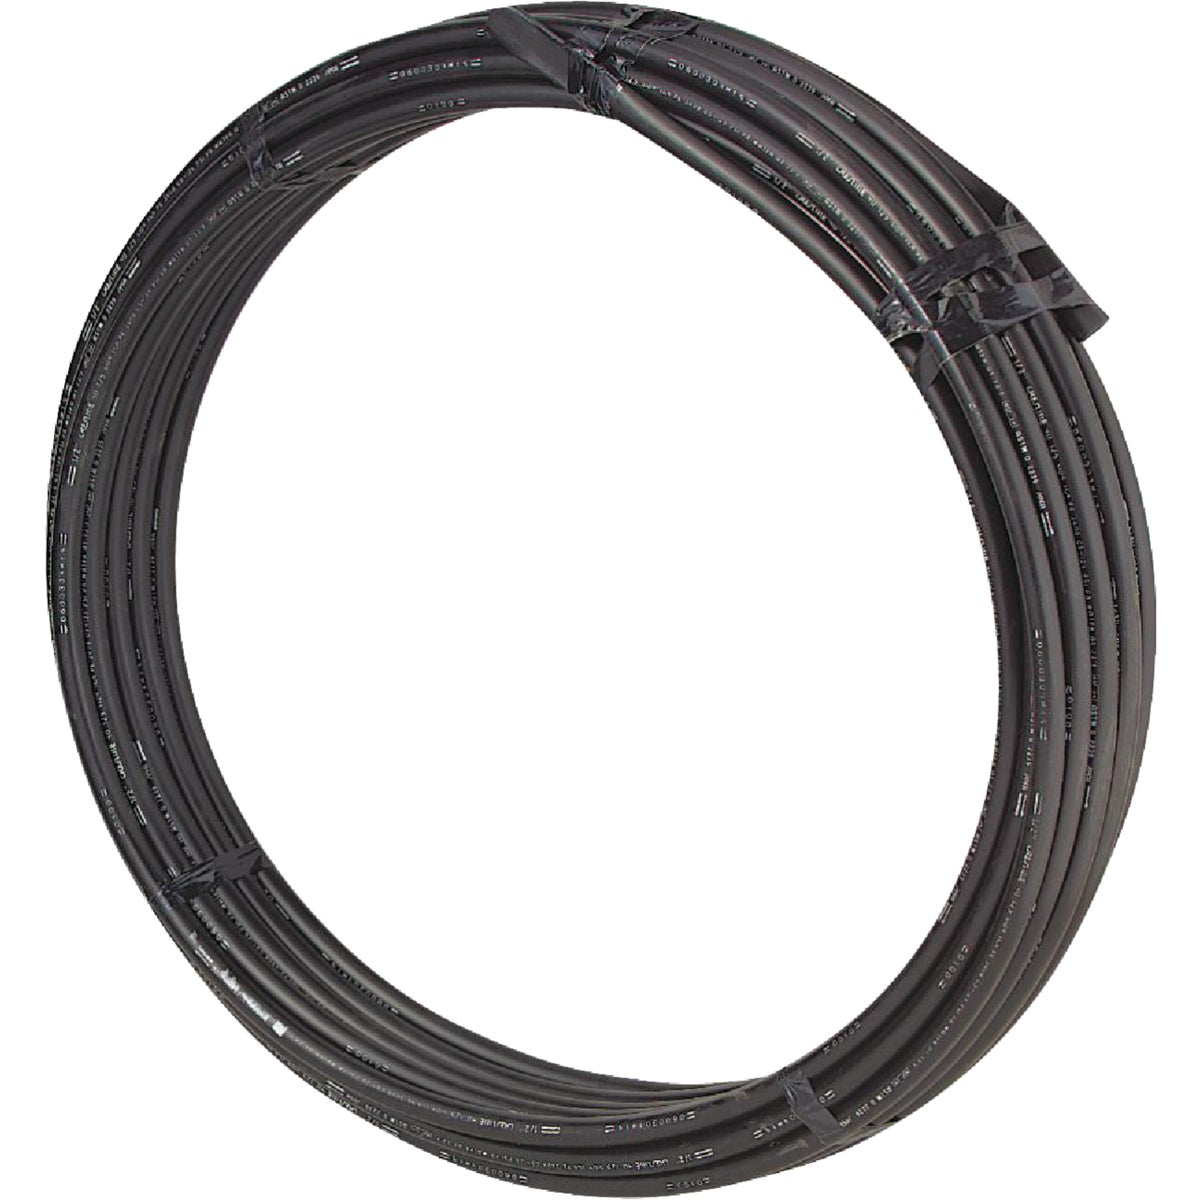 Item 403262, Long, continuous lengths in coils as indicated below.